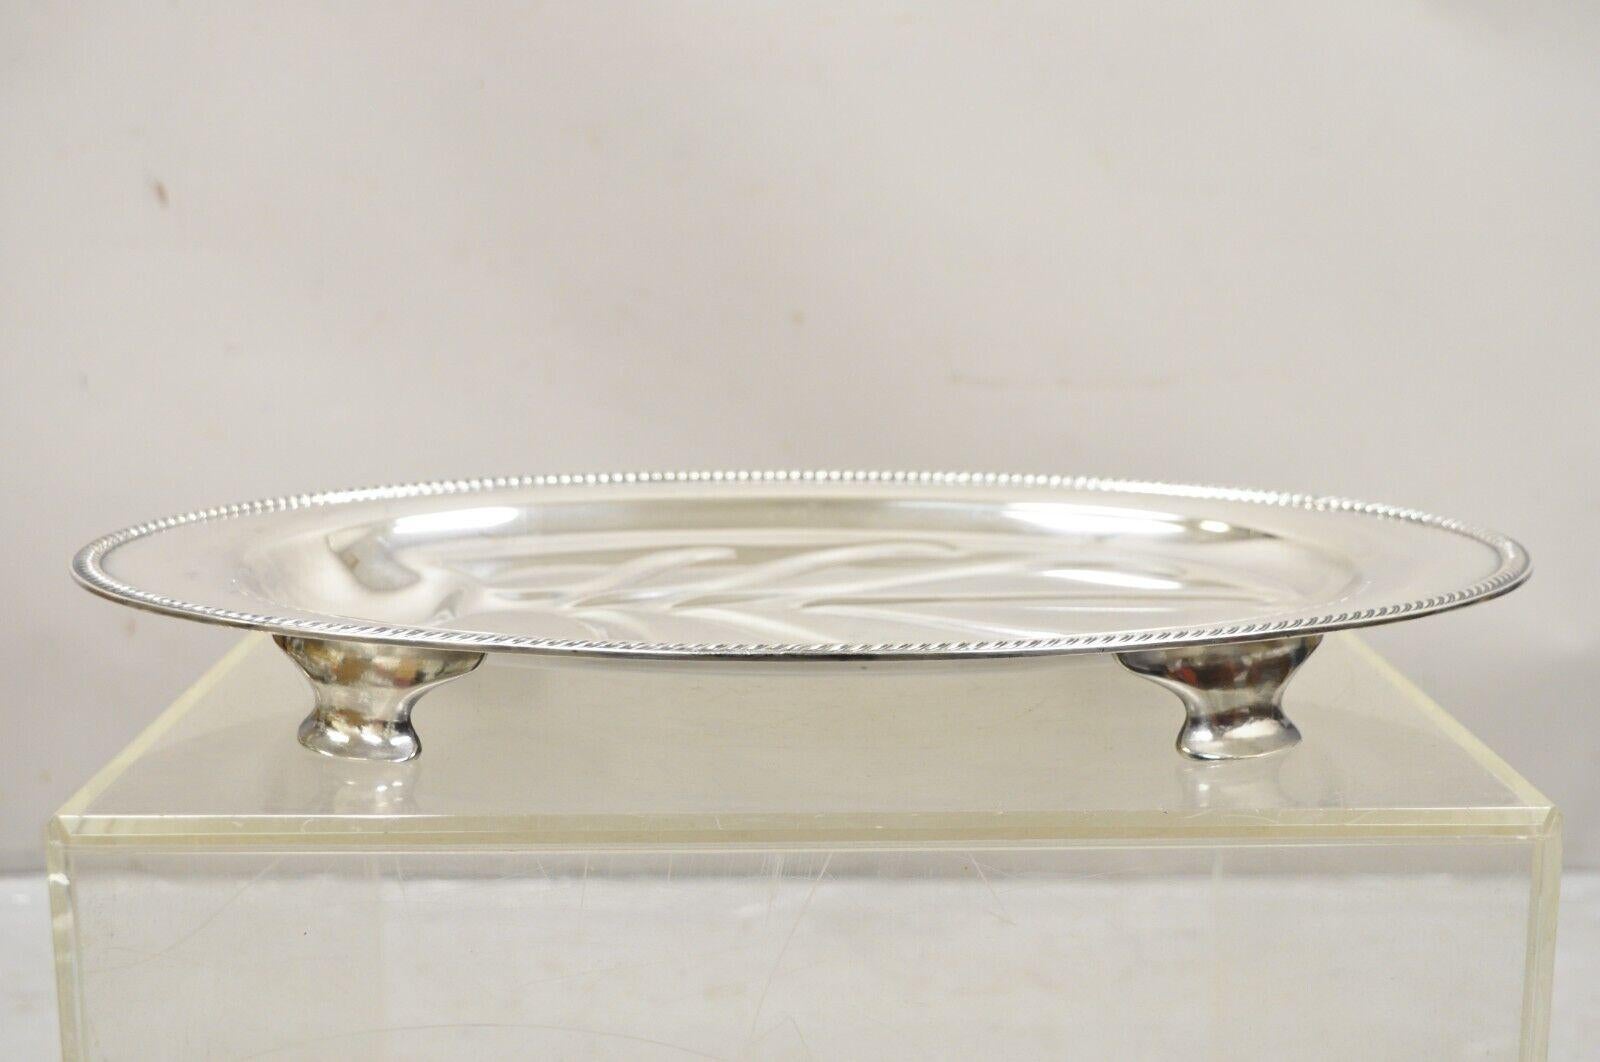 Vintage Community Plate English Regency Style Silver Plated Oval Meat Cutlery Serving Platter. Circa Mid 20th Century.
Measurements: 2